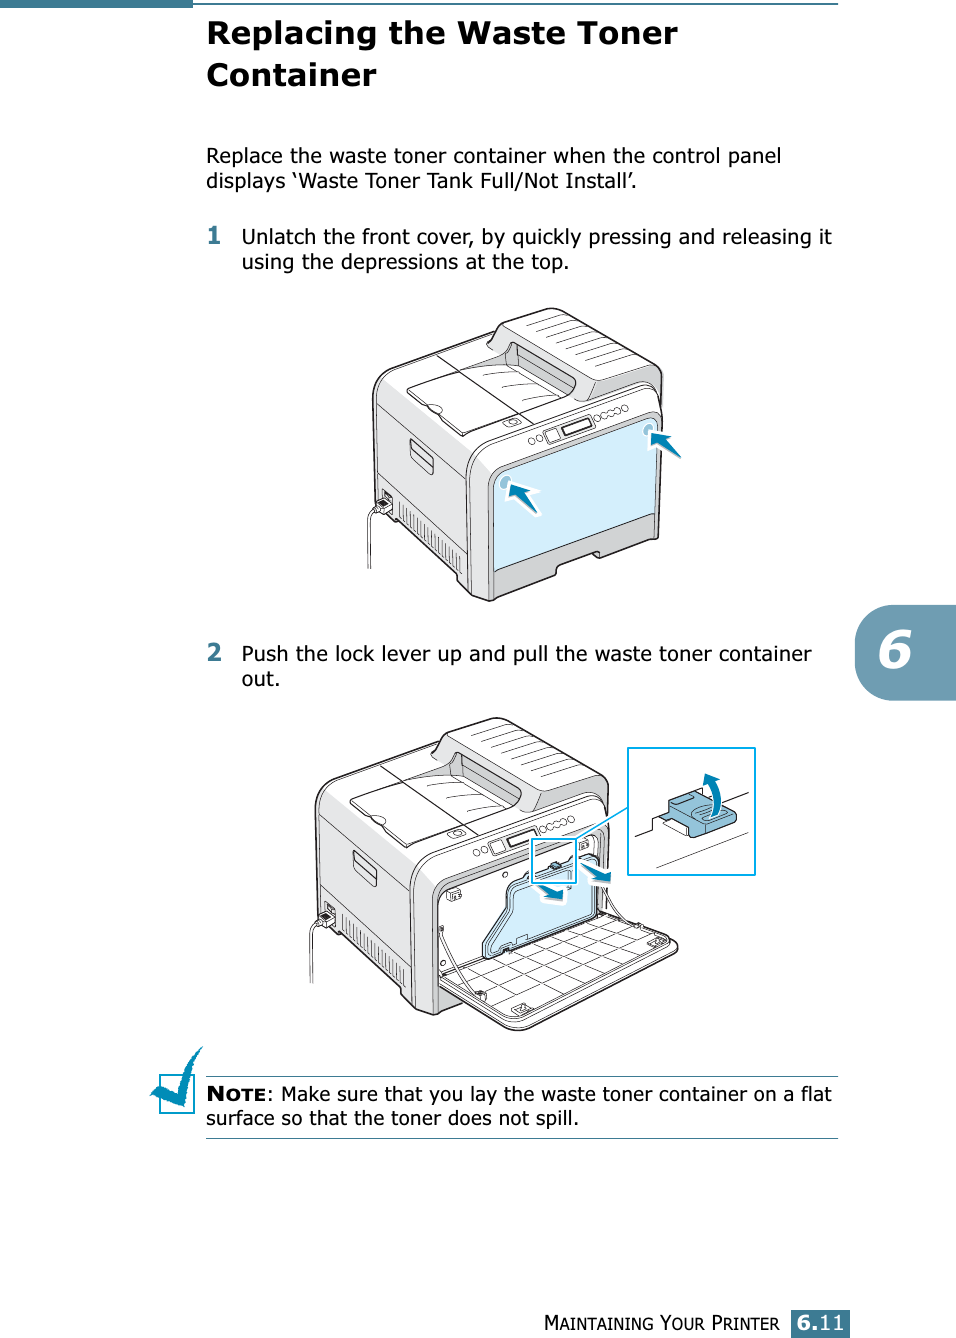 MAINTAINING YOUR PRINTER6.116Replacing the Waste Toner ContainerReplace the waste toner container when the control panel displays ‘Waste Toner Tank Full/Not Install’. 1Unlatch the front cover, by quickly pressing and releasing it using the depressions at the top.2Push the lock lever up and pull the waste toner container out.NOTE: Make sure that you lay the waste toner container on a flat surface so that the toner does not spill.